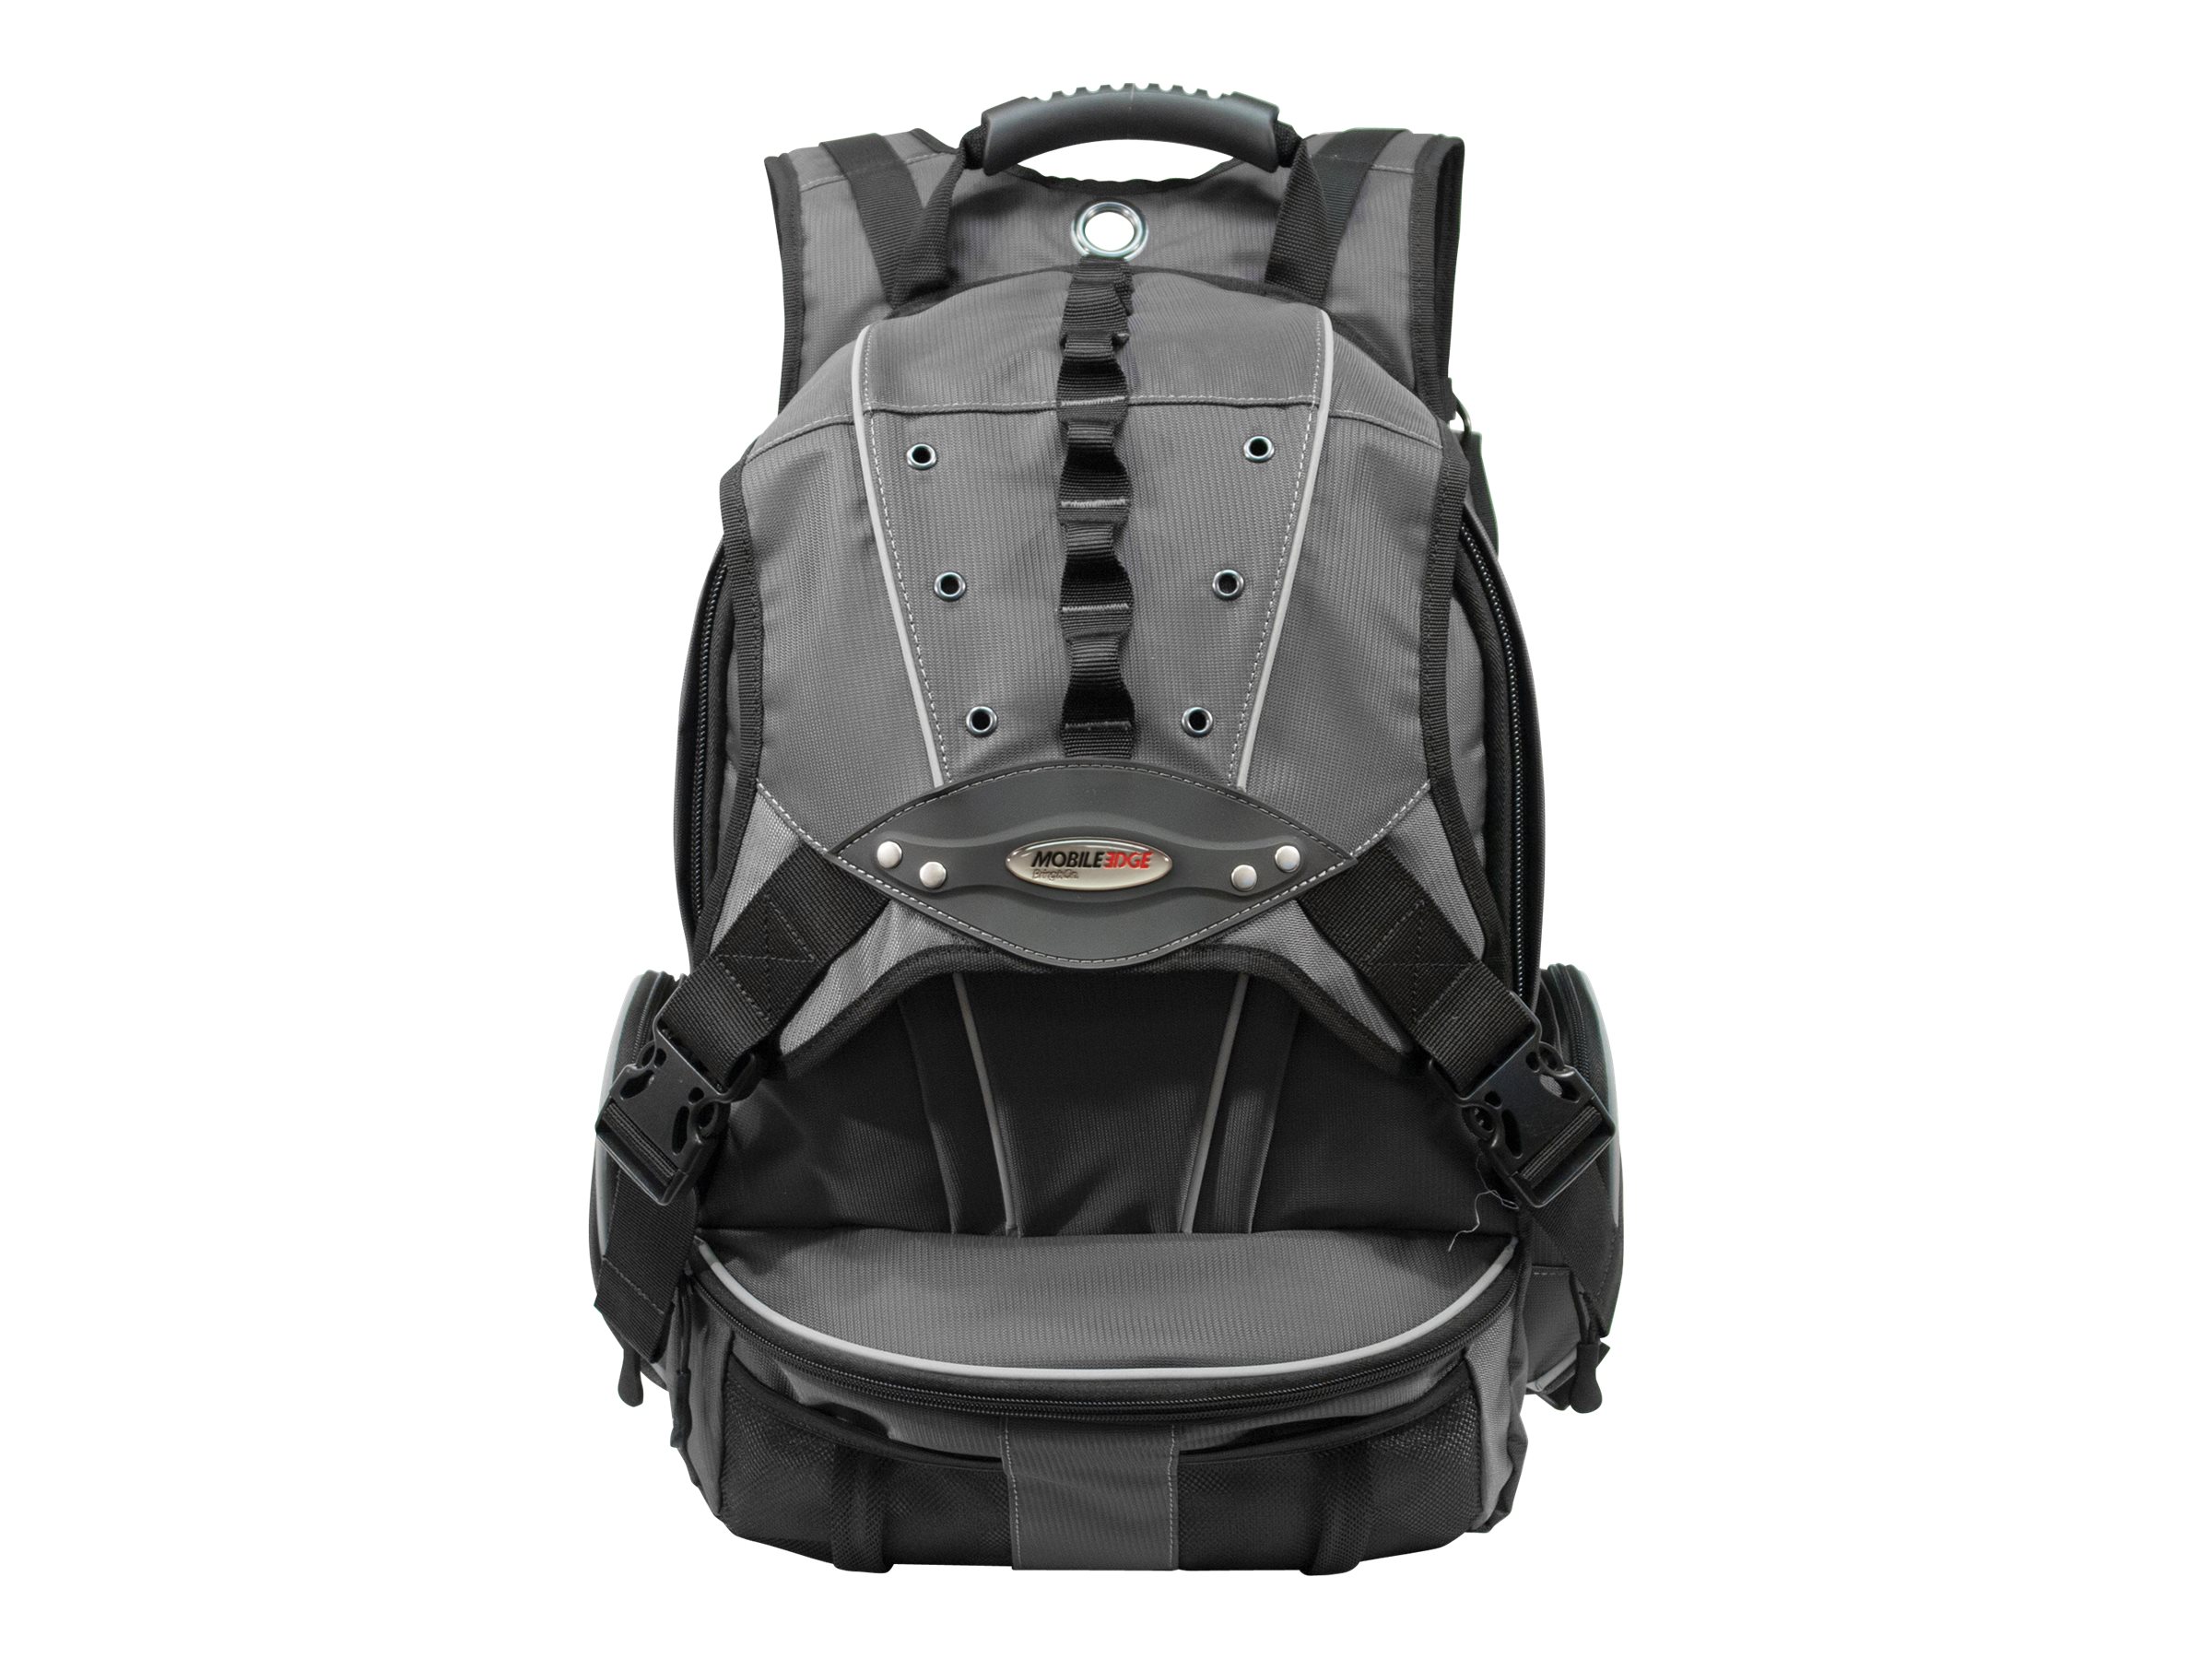 Mobile Edge Graphite Backpack 17.3 For Professionals and Students